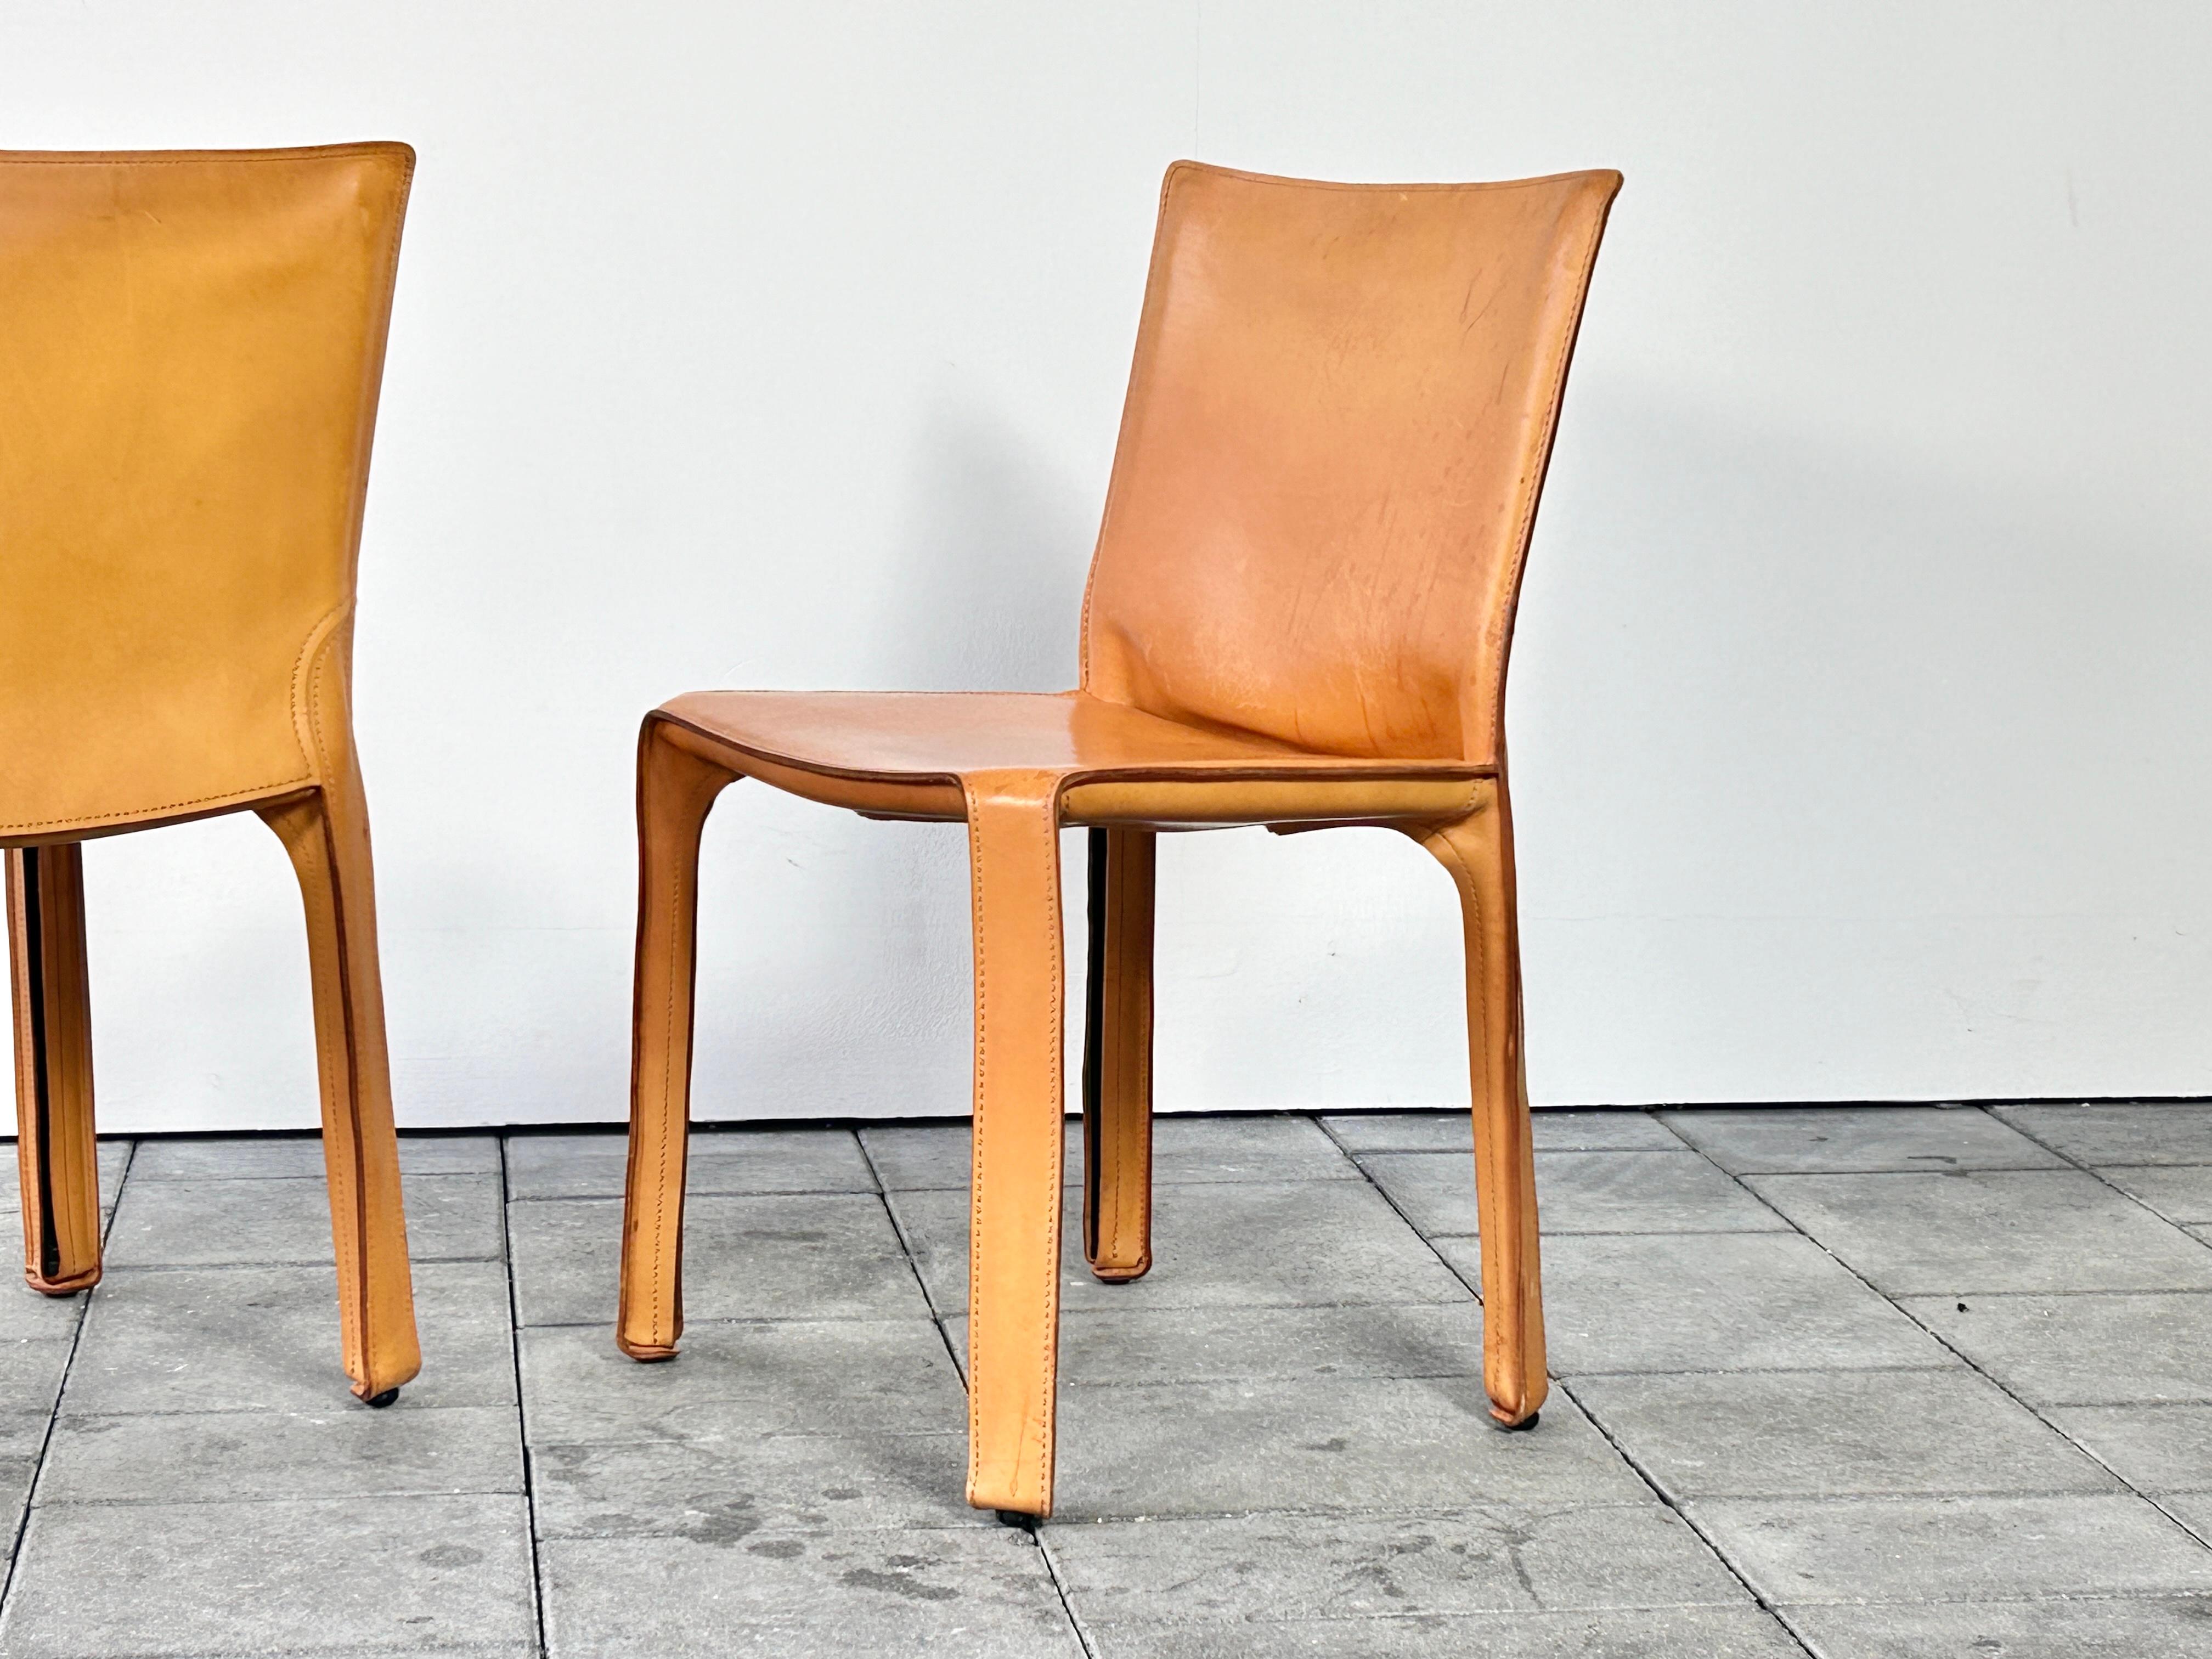 Metal Set of 4 Cassina Cab Chairs designed by Mario Bellini 1978 in Natural Leather